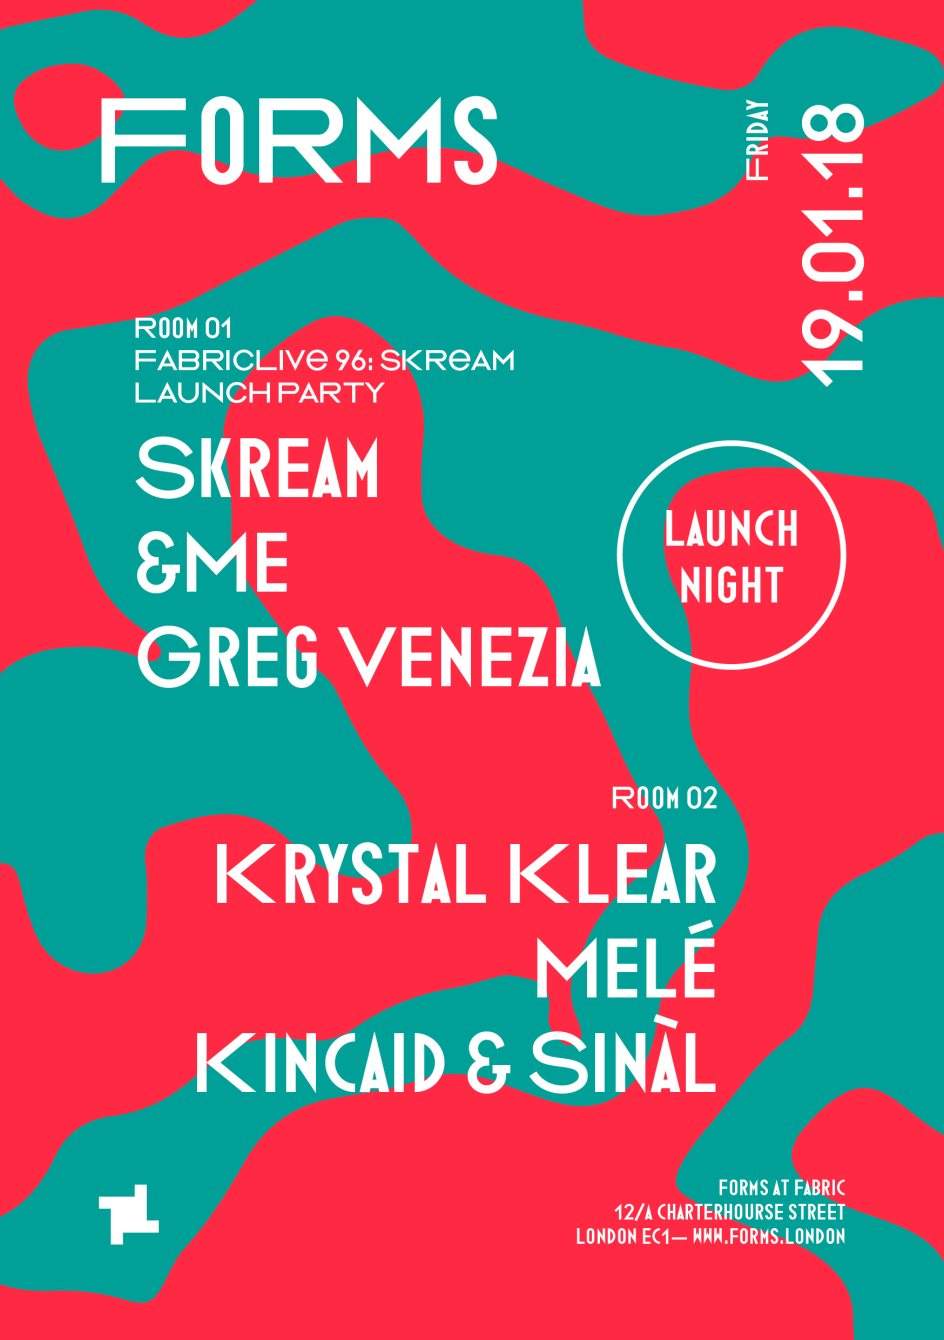 Forms Launch Party with Skream, &ME, Krystal Klear & Melé - フライヤー裏